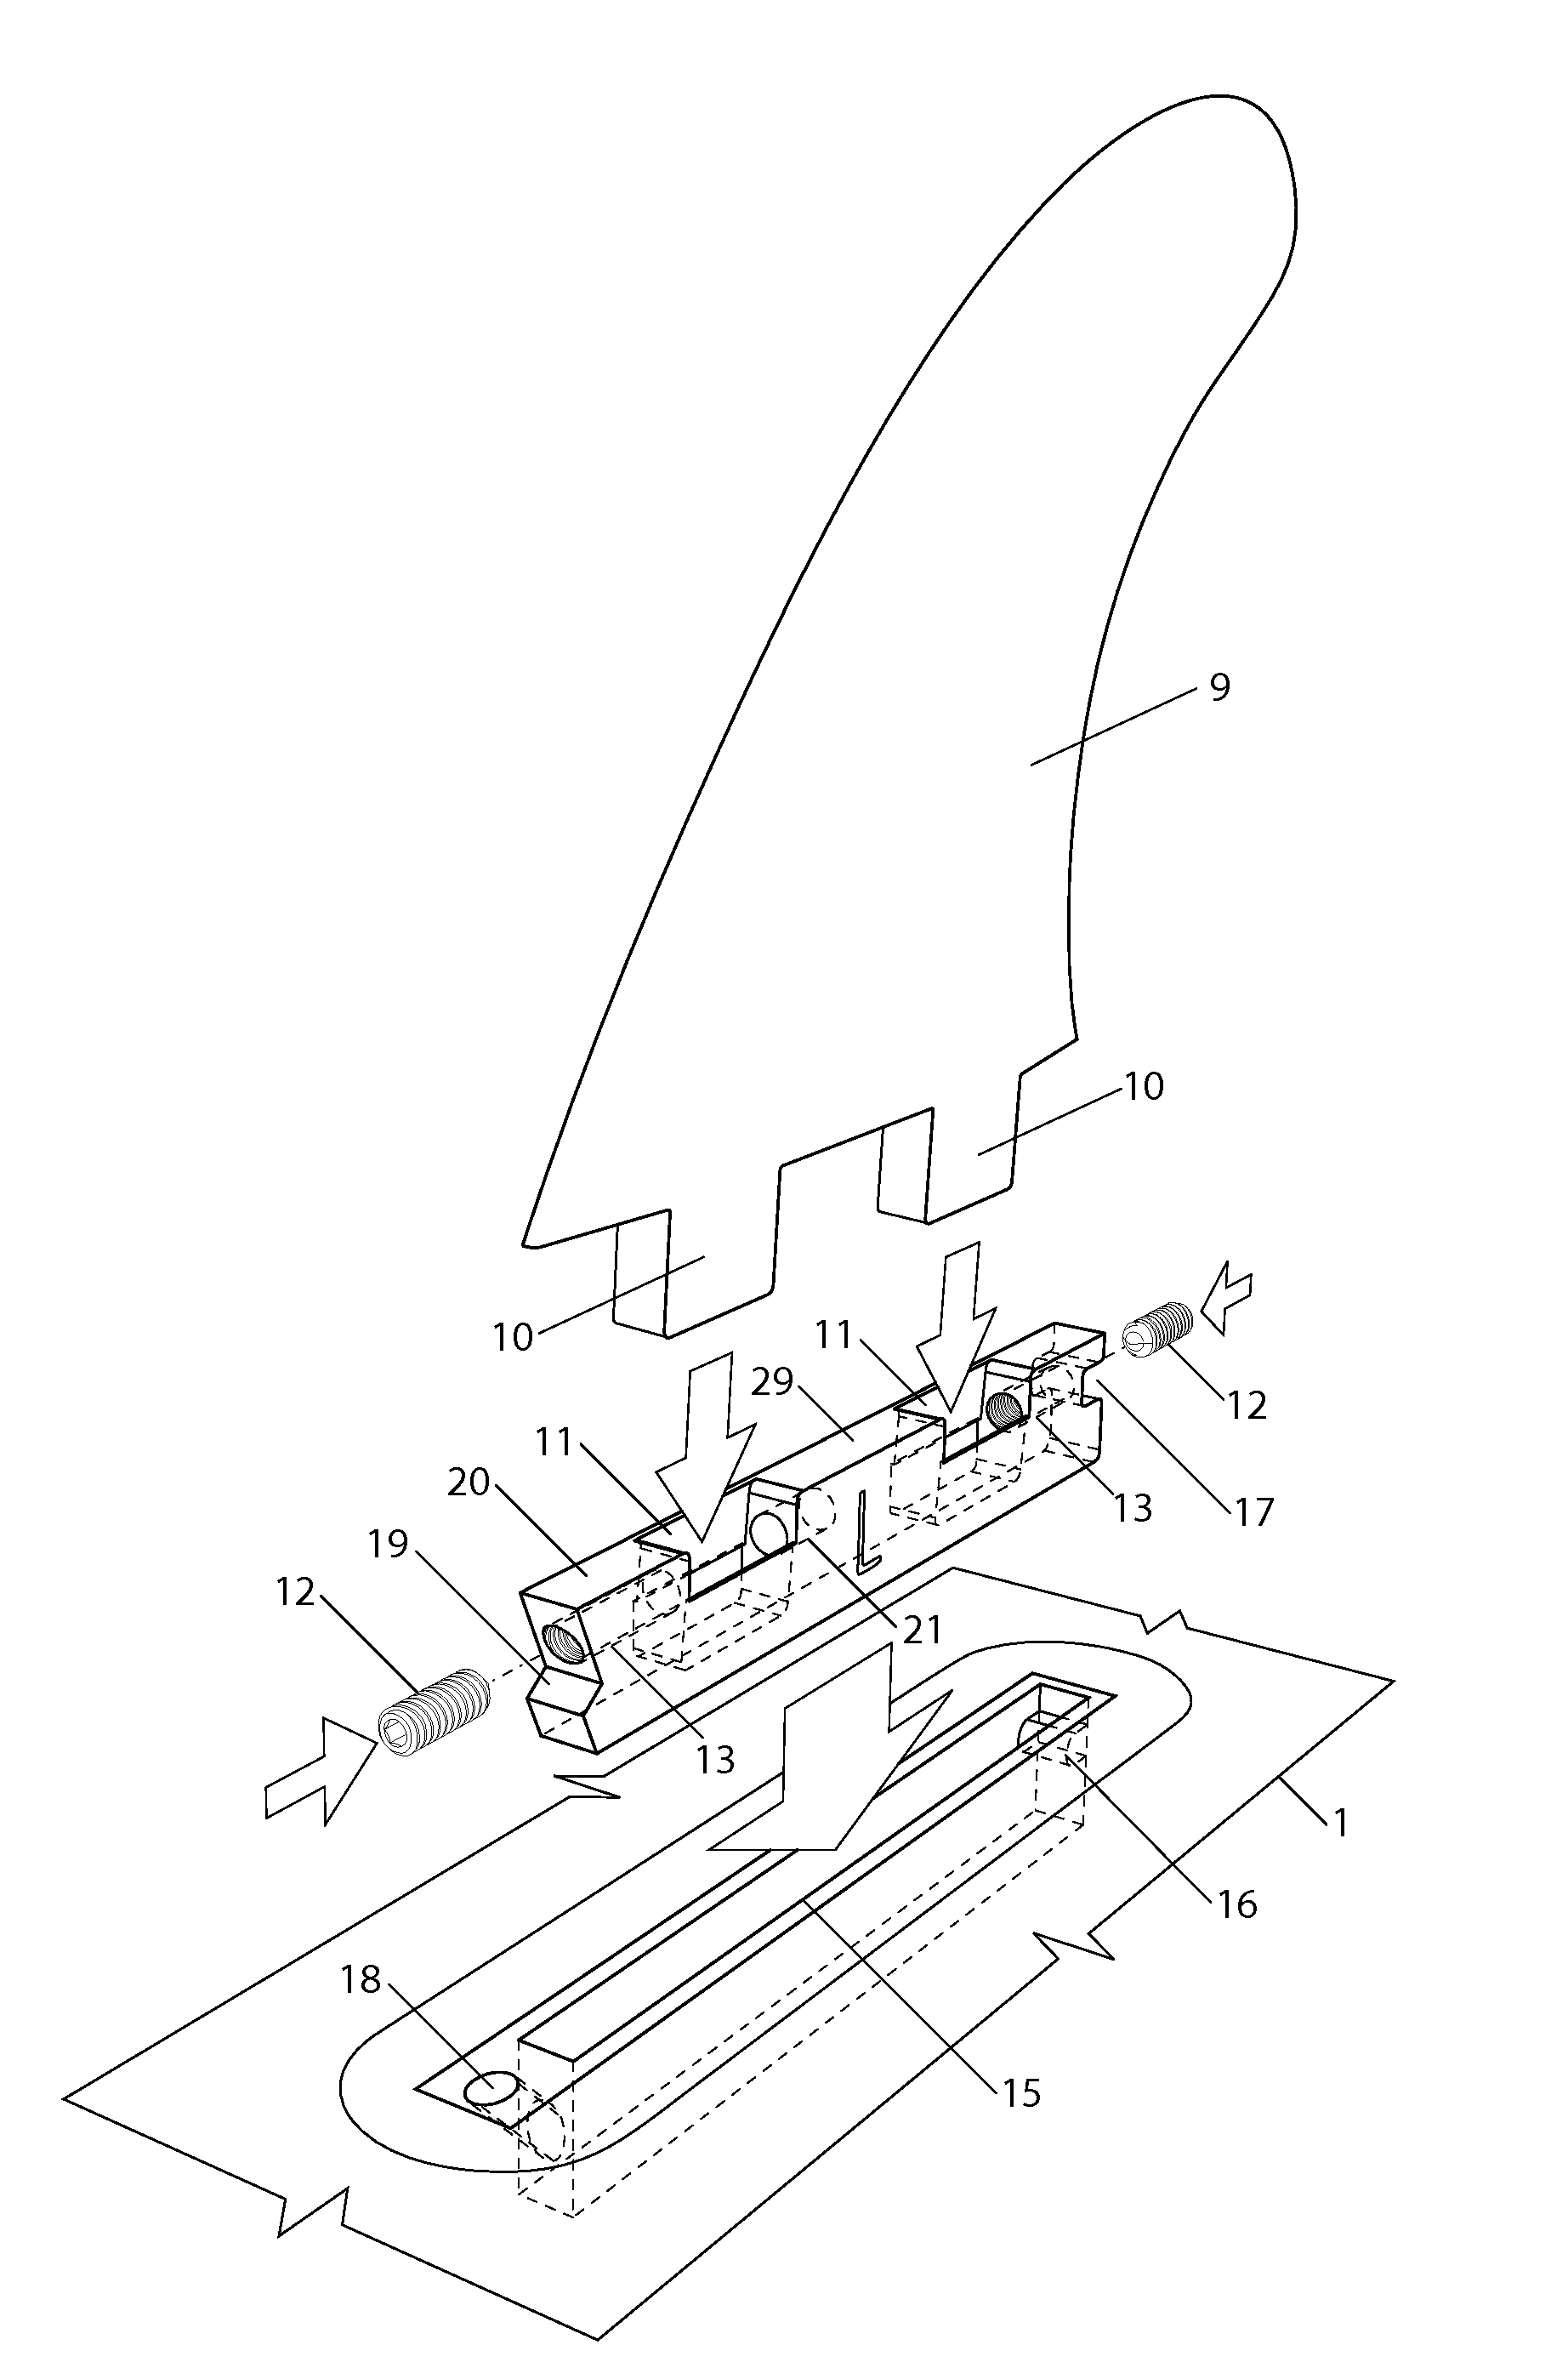 Adapter for the Insert of Two-Tabbed Fins into Single-Tabbed Fin Boxes of a Surfboard